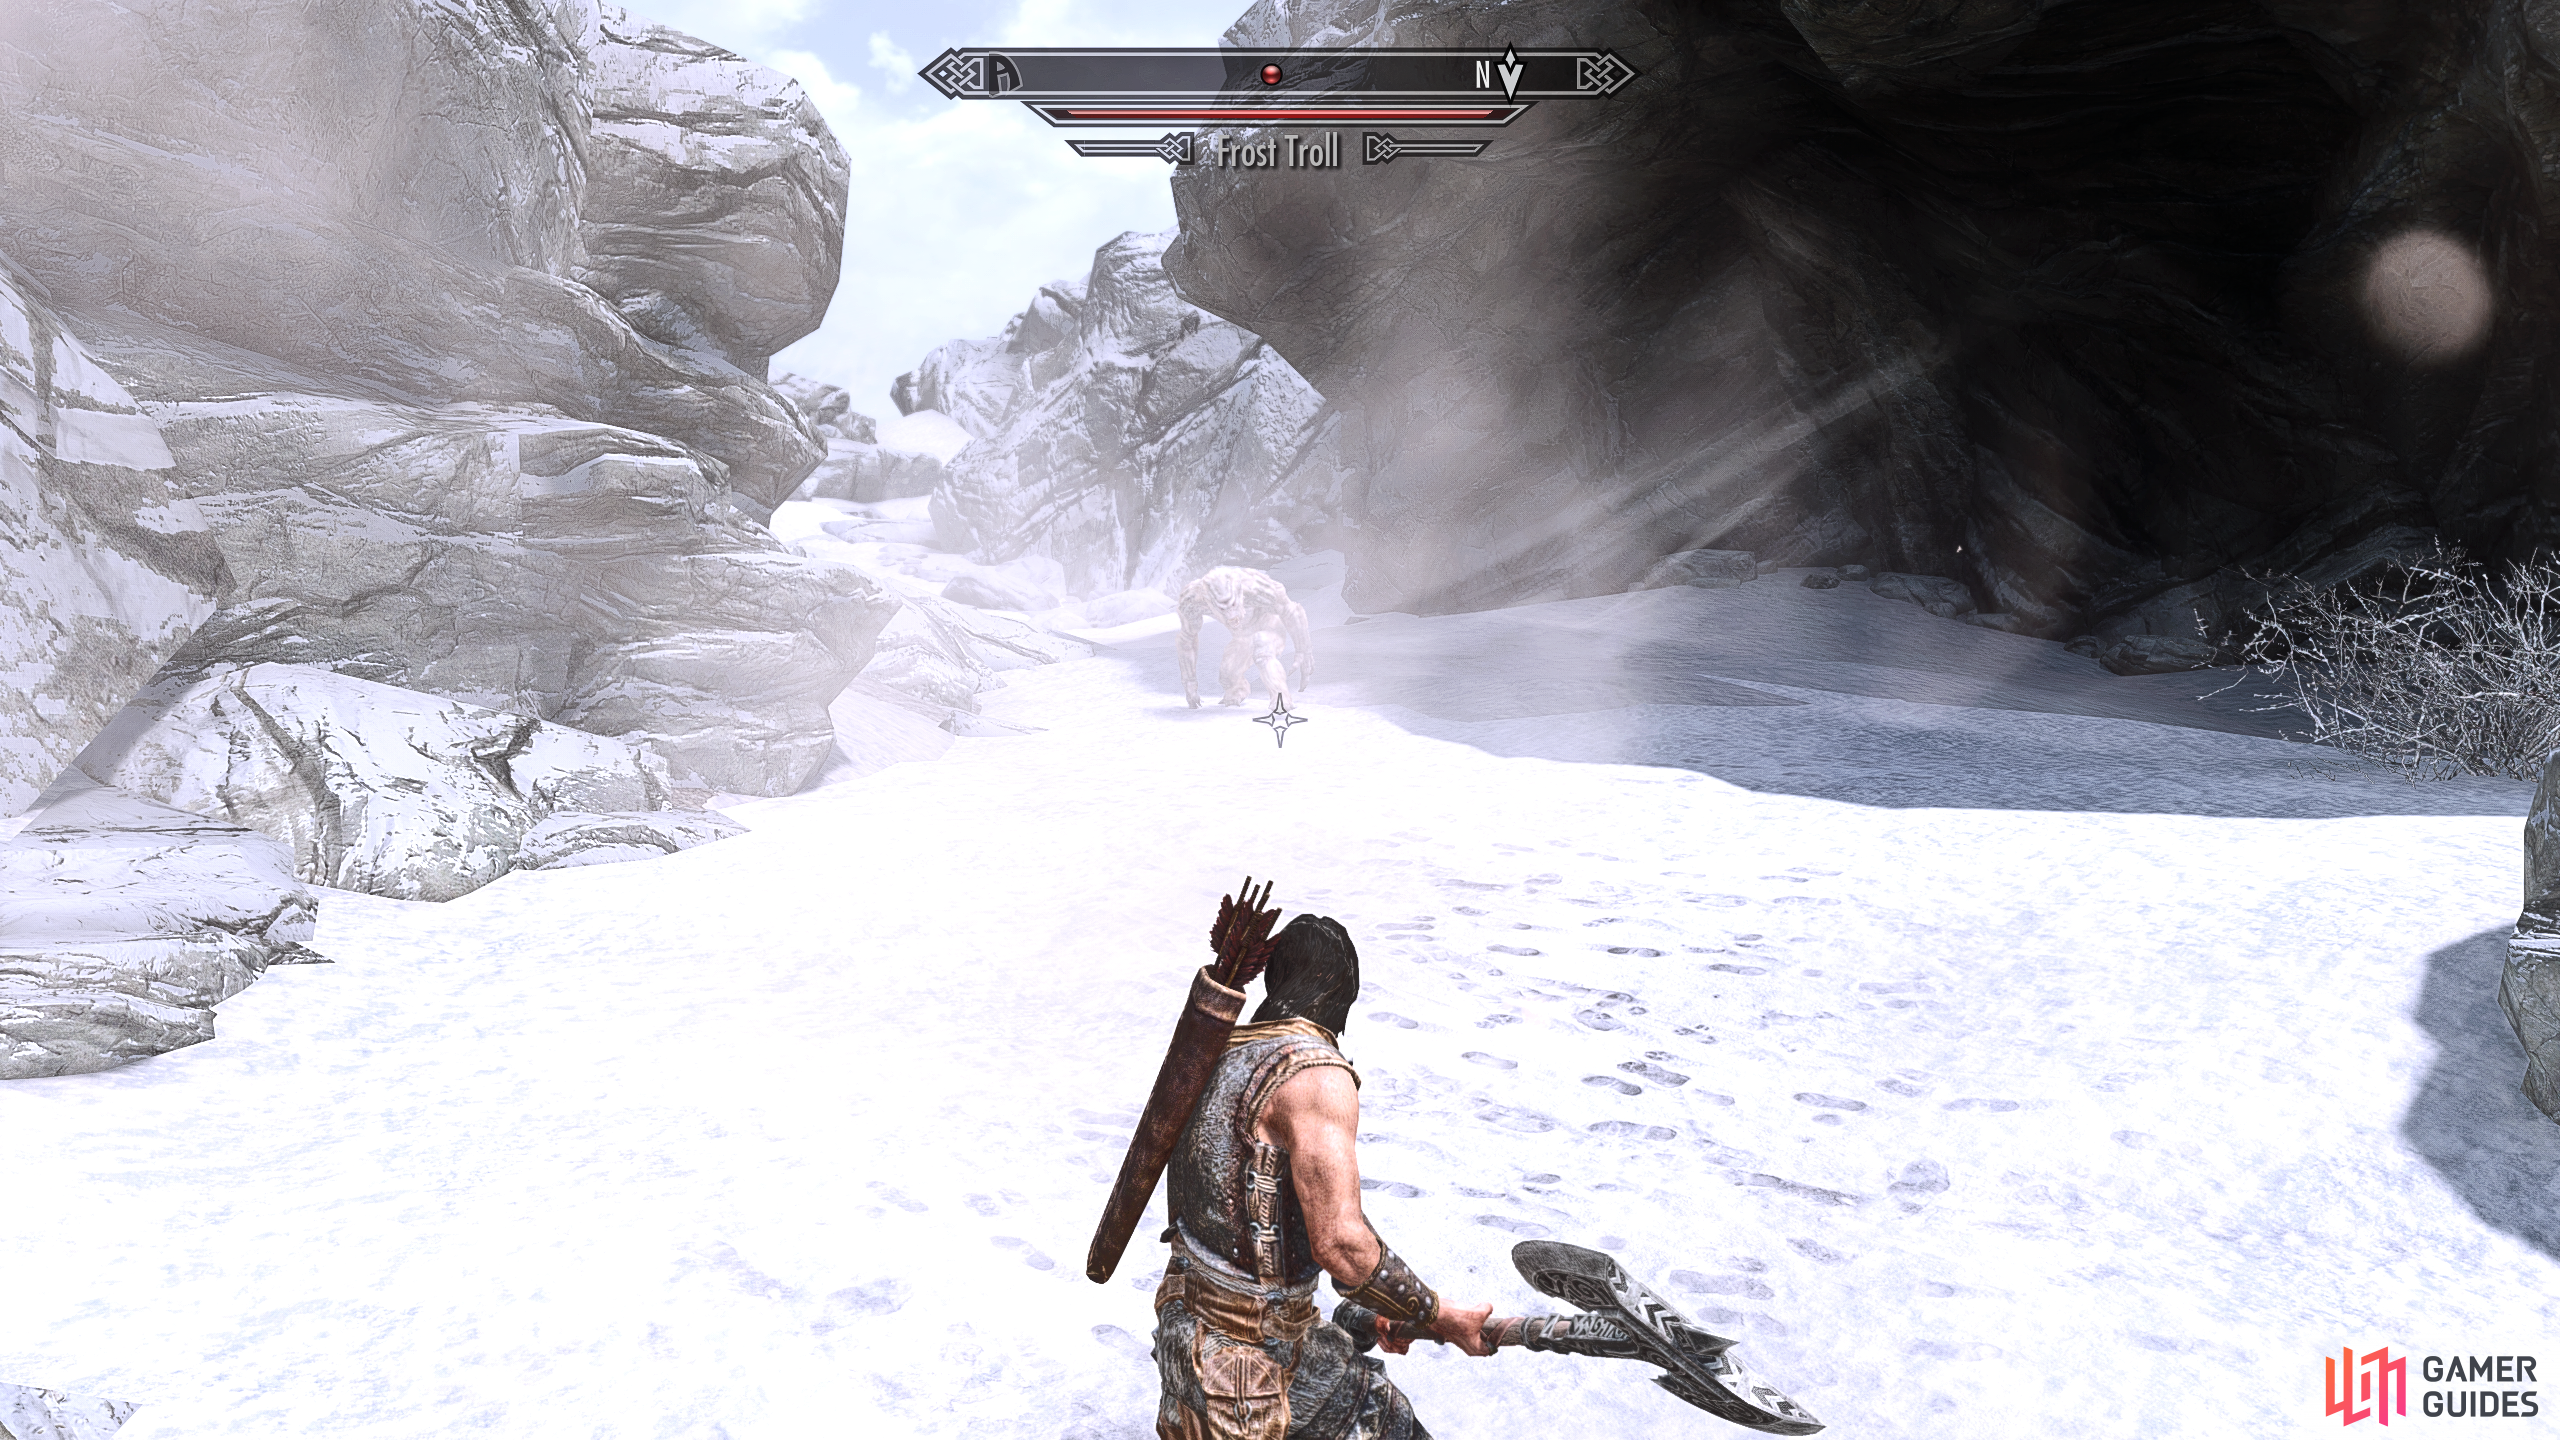 The Frost Troll will be a tough fight if you're low level, but you can sprint past it if you prefer.